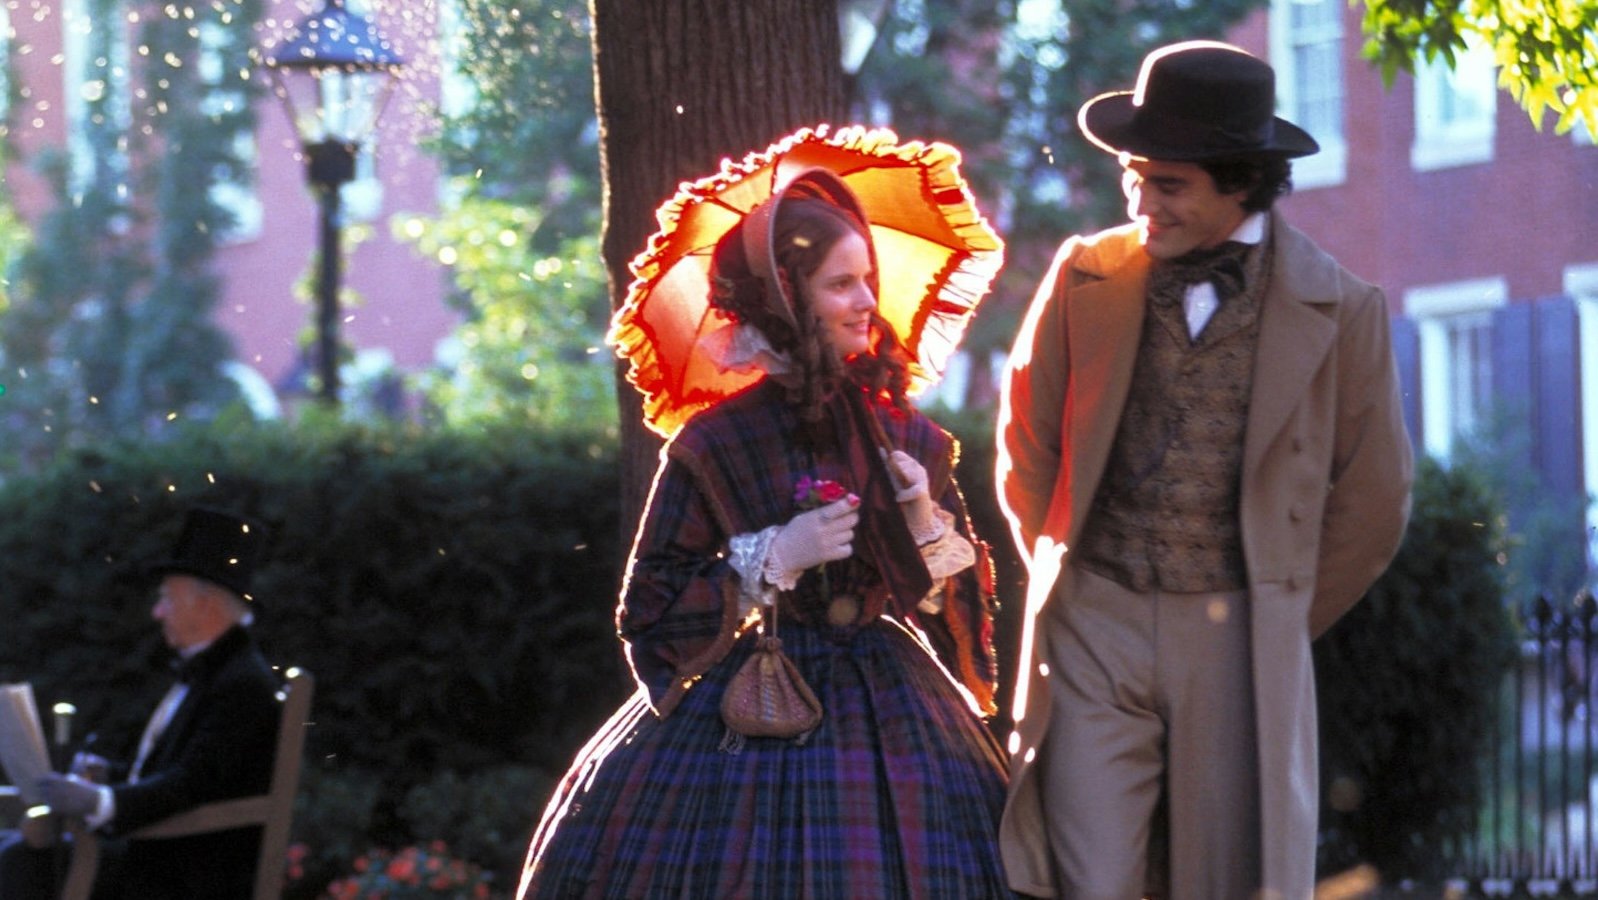 A woman with a yellow and orange parasol lit up by the sun walks down a city street next to a man in a hat; they are smiling and are wearing late nineteenth-century-style clothes